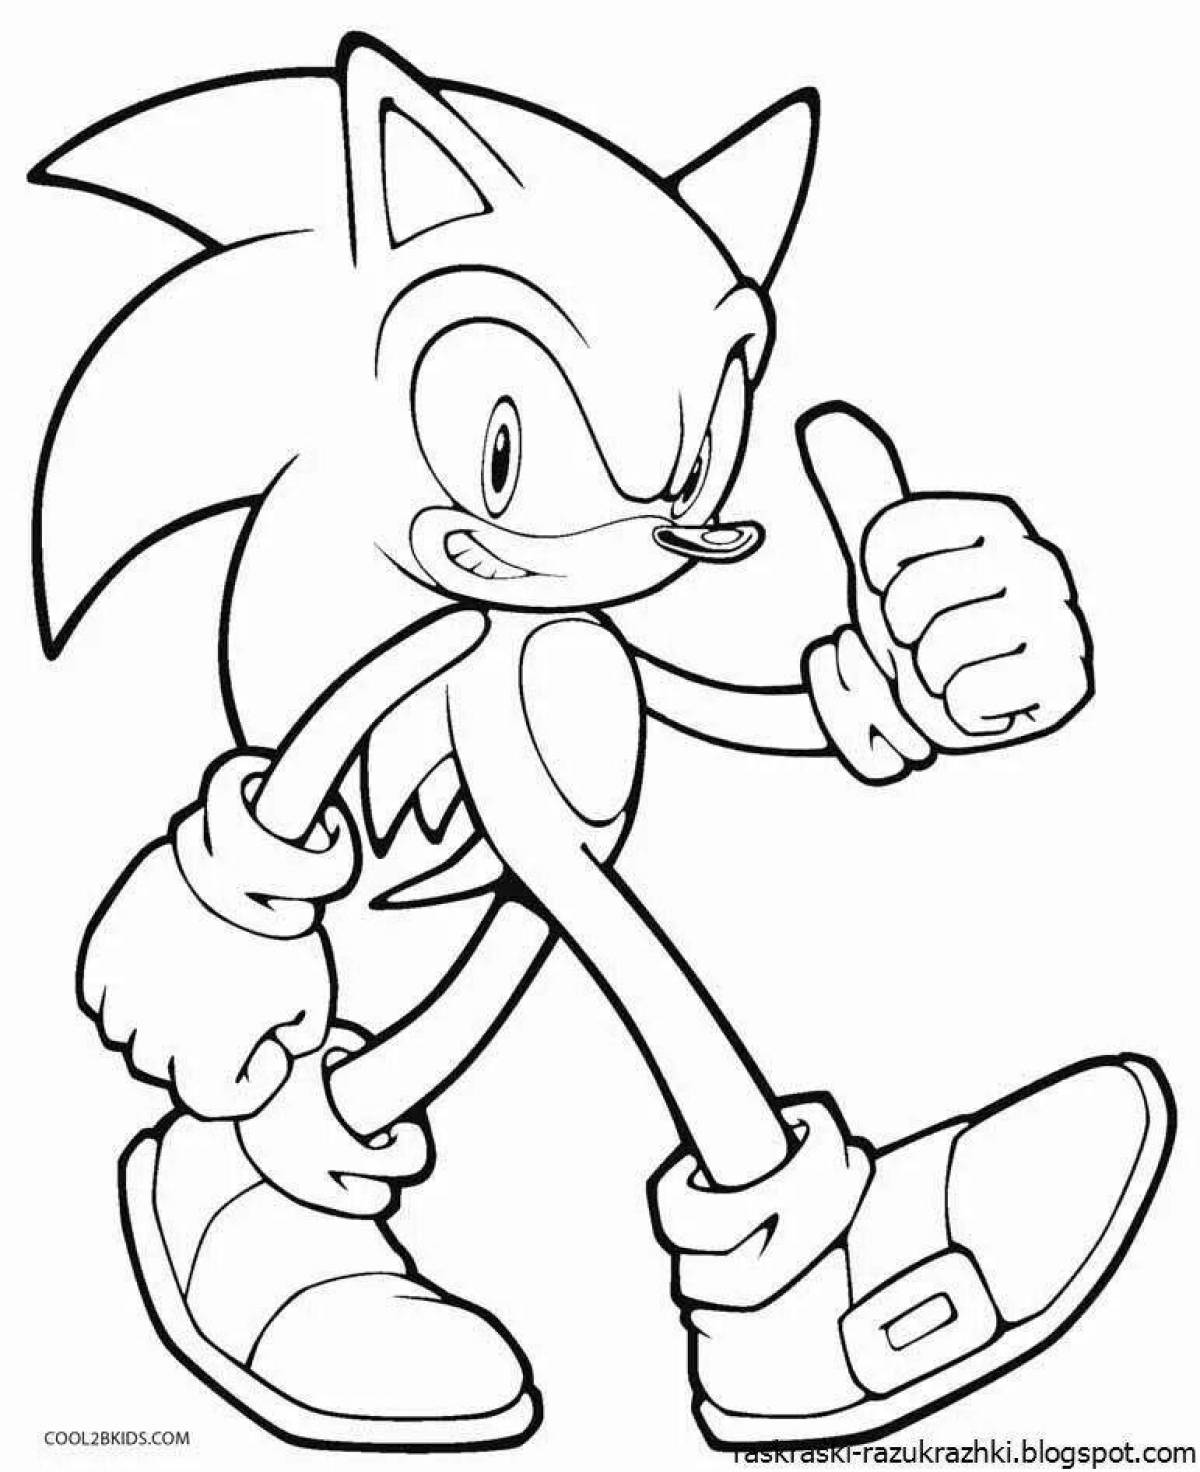 Stormy new year sonic coloring page